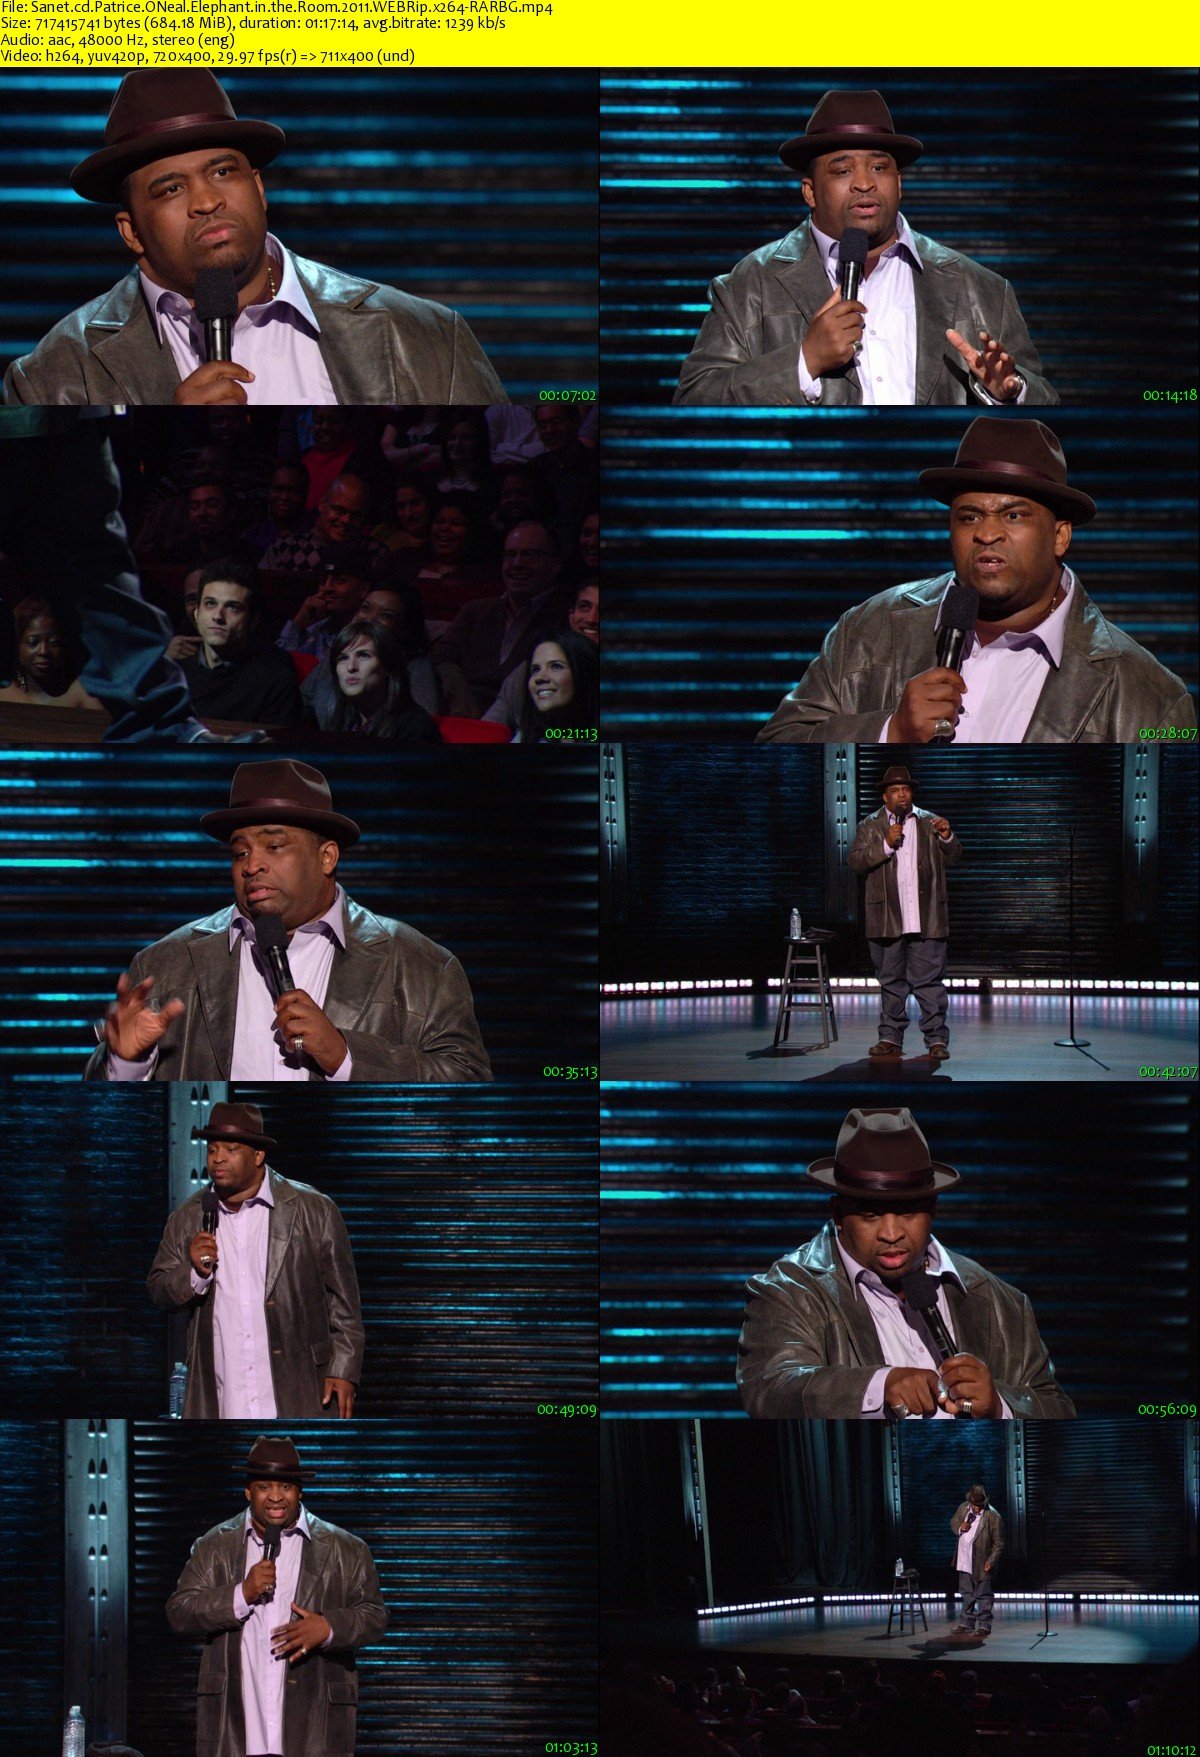 Patrice ONeal - Elephant In The Room - YouTube